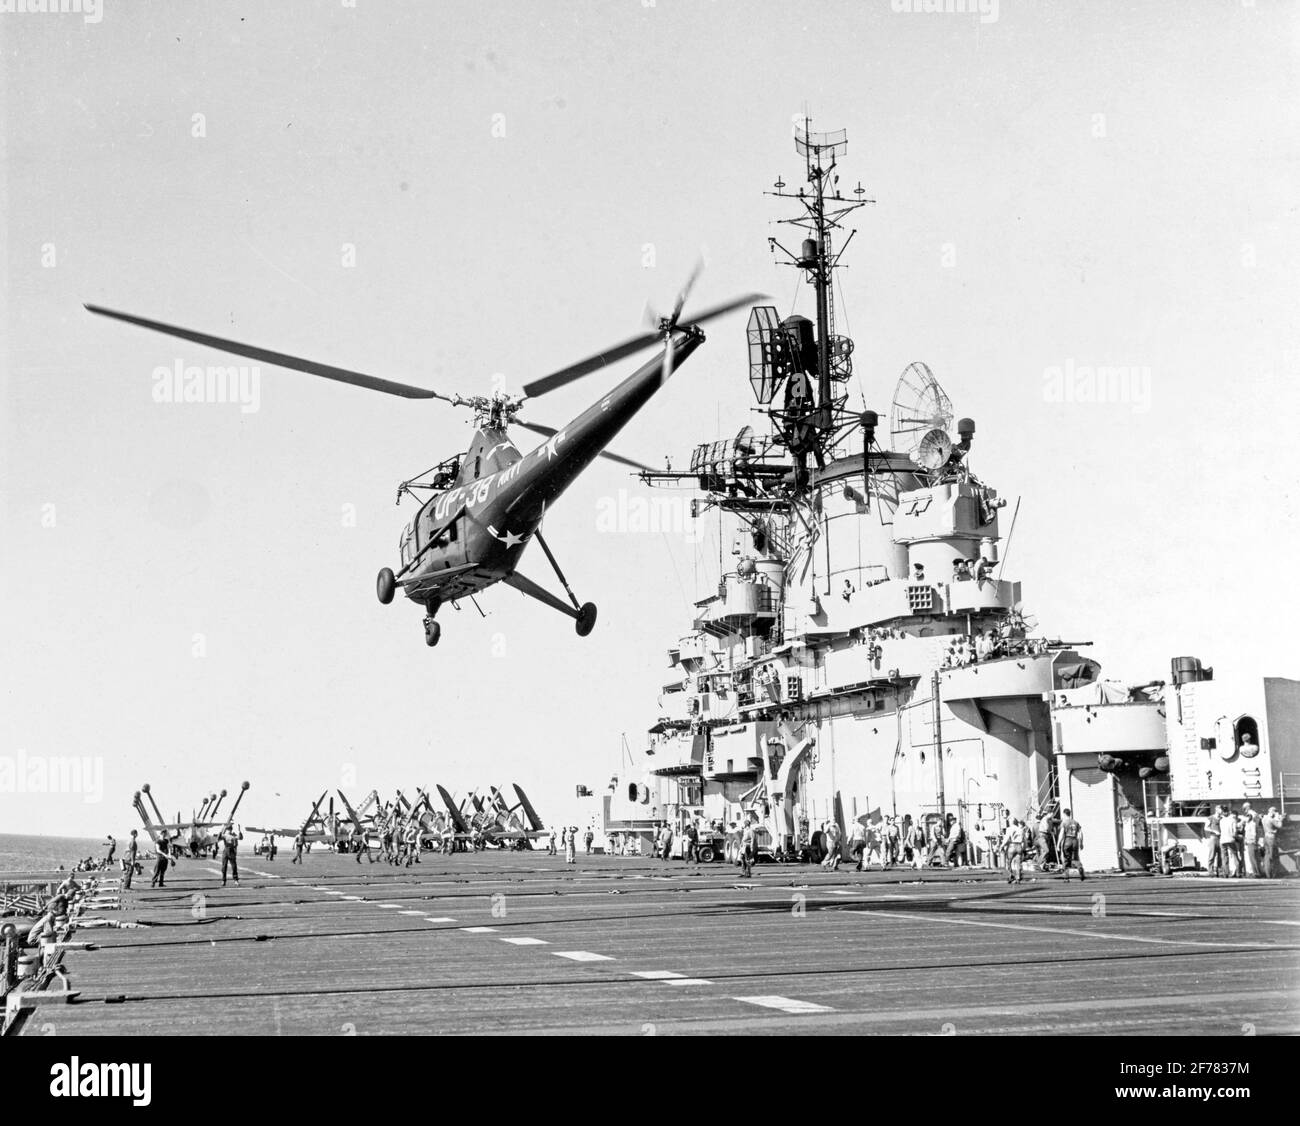 USS Boxer (CV-21) Ship's HO3S-1 helicopter landing after an air-sea rescue mission, during operations off Korea. Photo is dated 13 September 1951. Official U.S. Navy Photograph Stock Photo